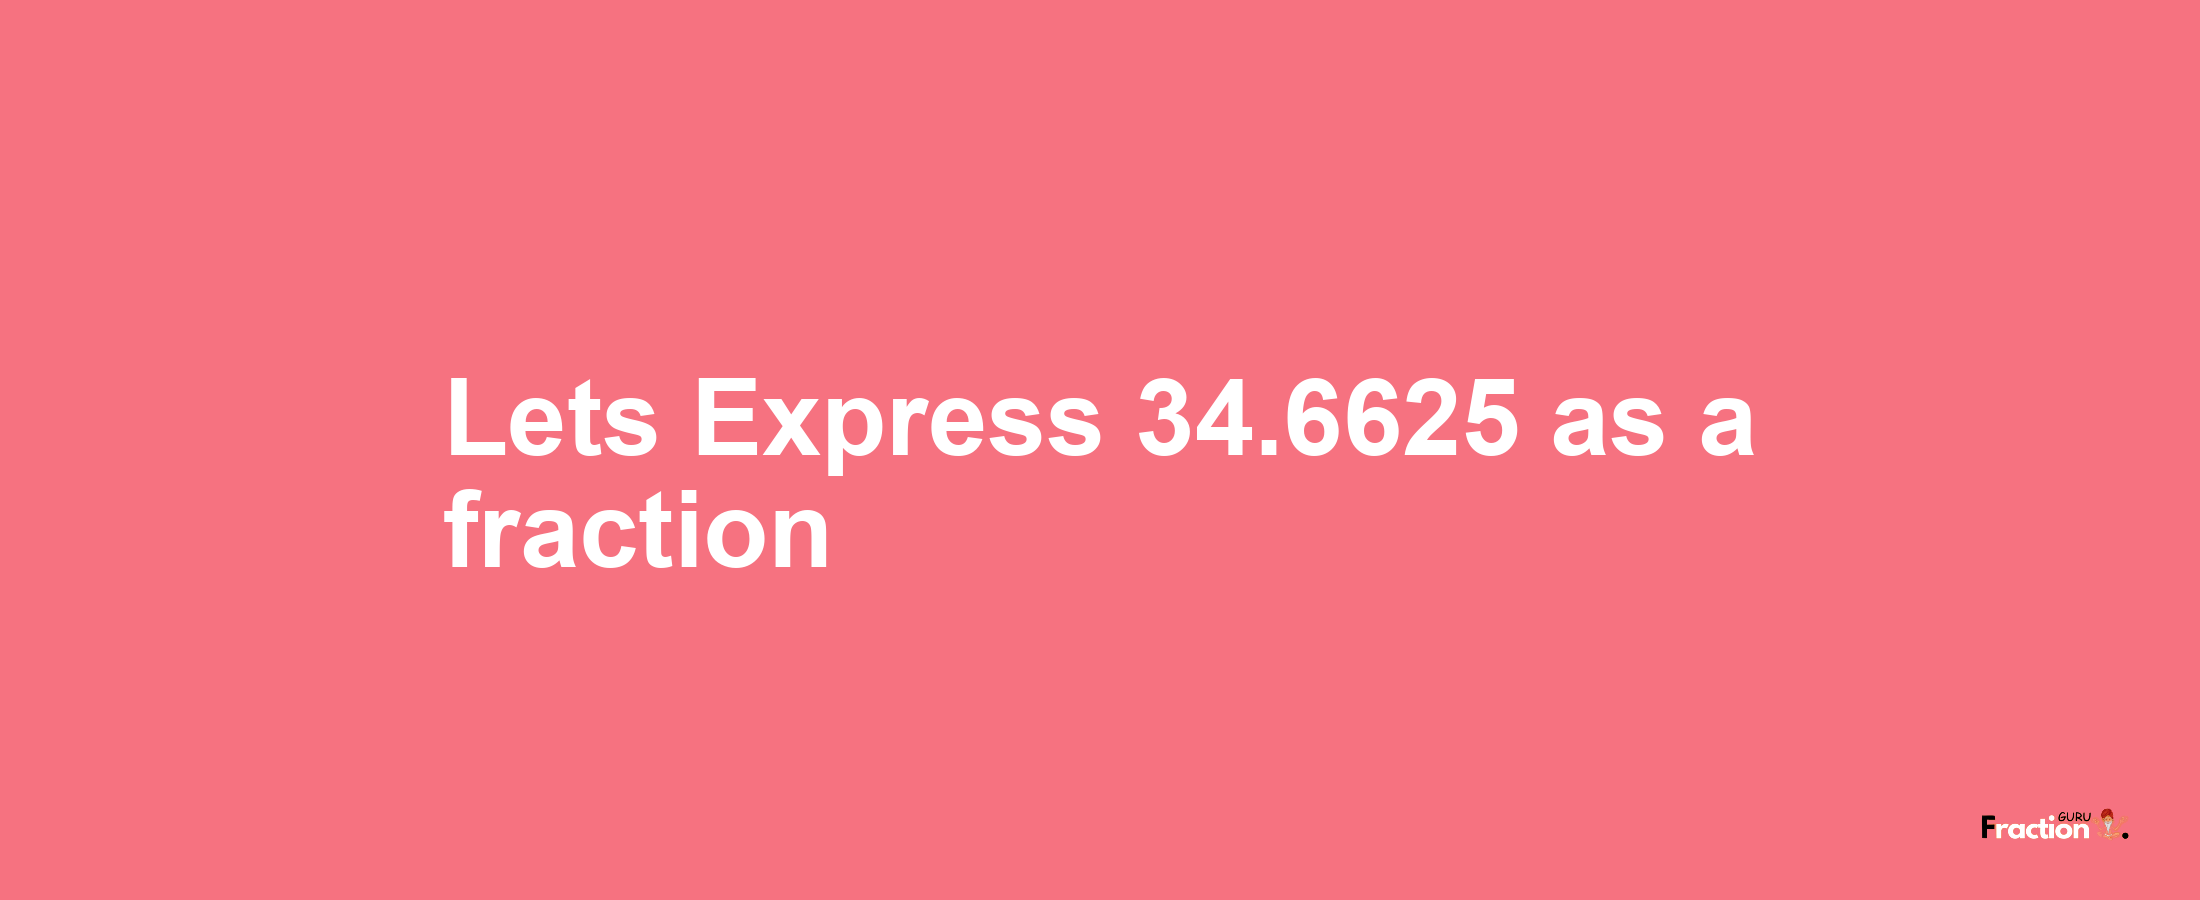 Lets Express 34.6625 as afraction